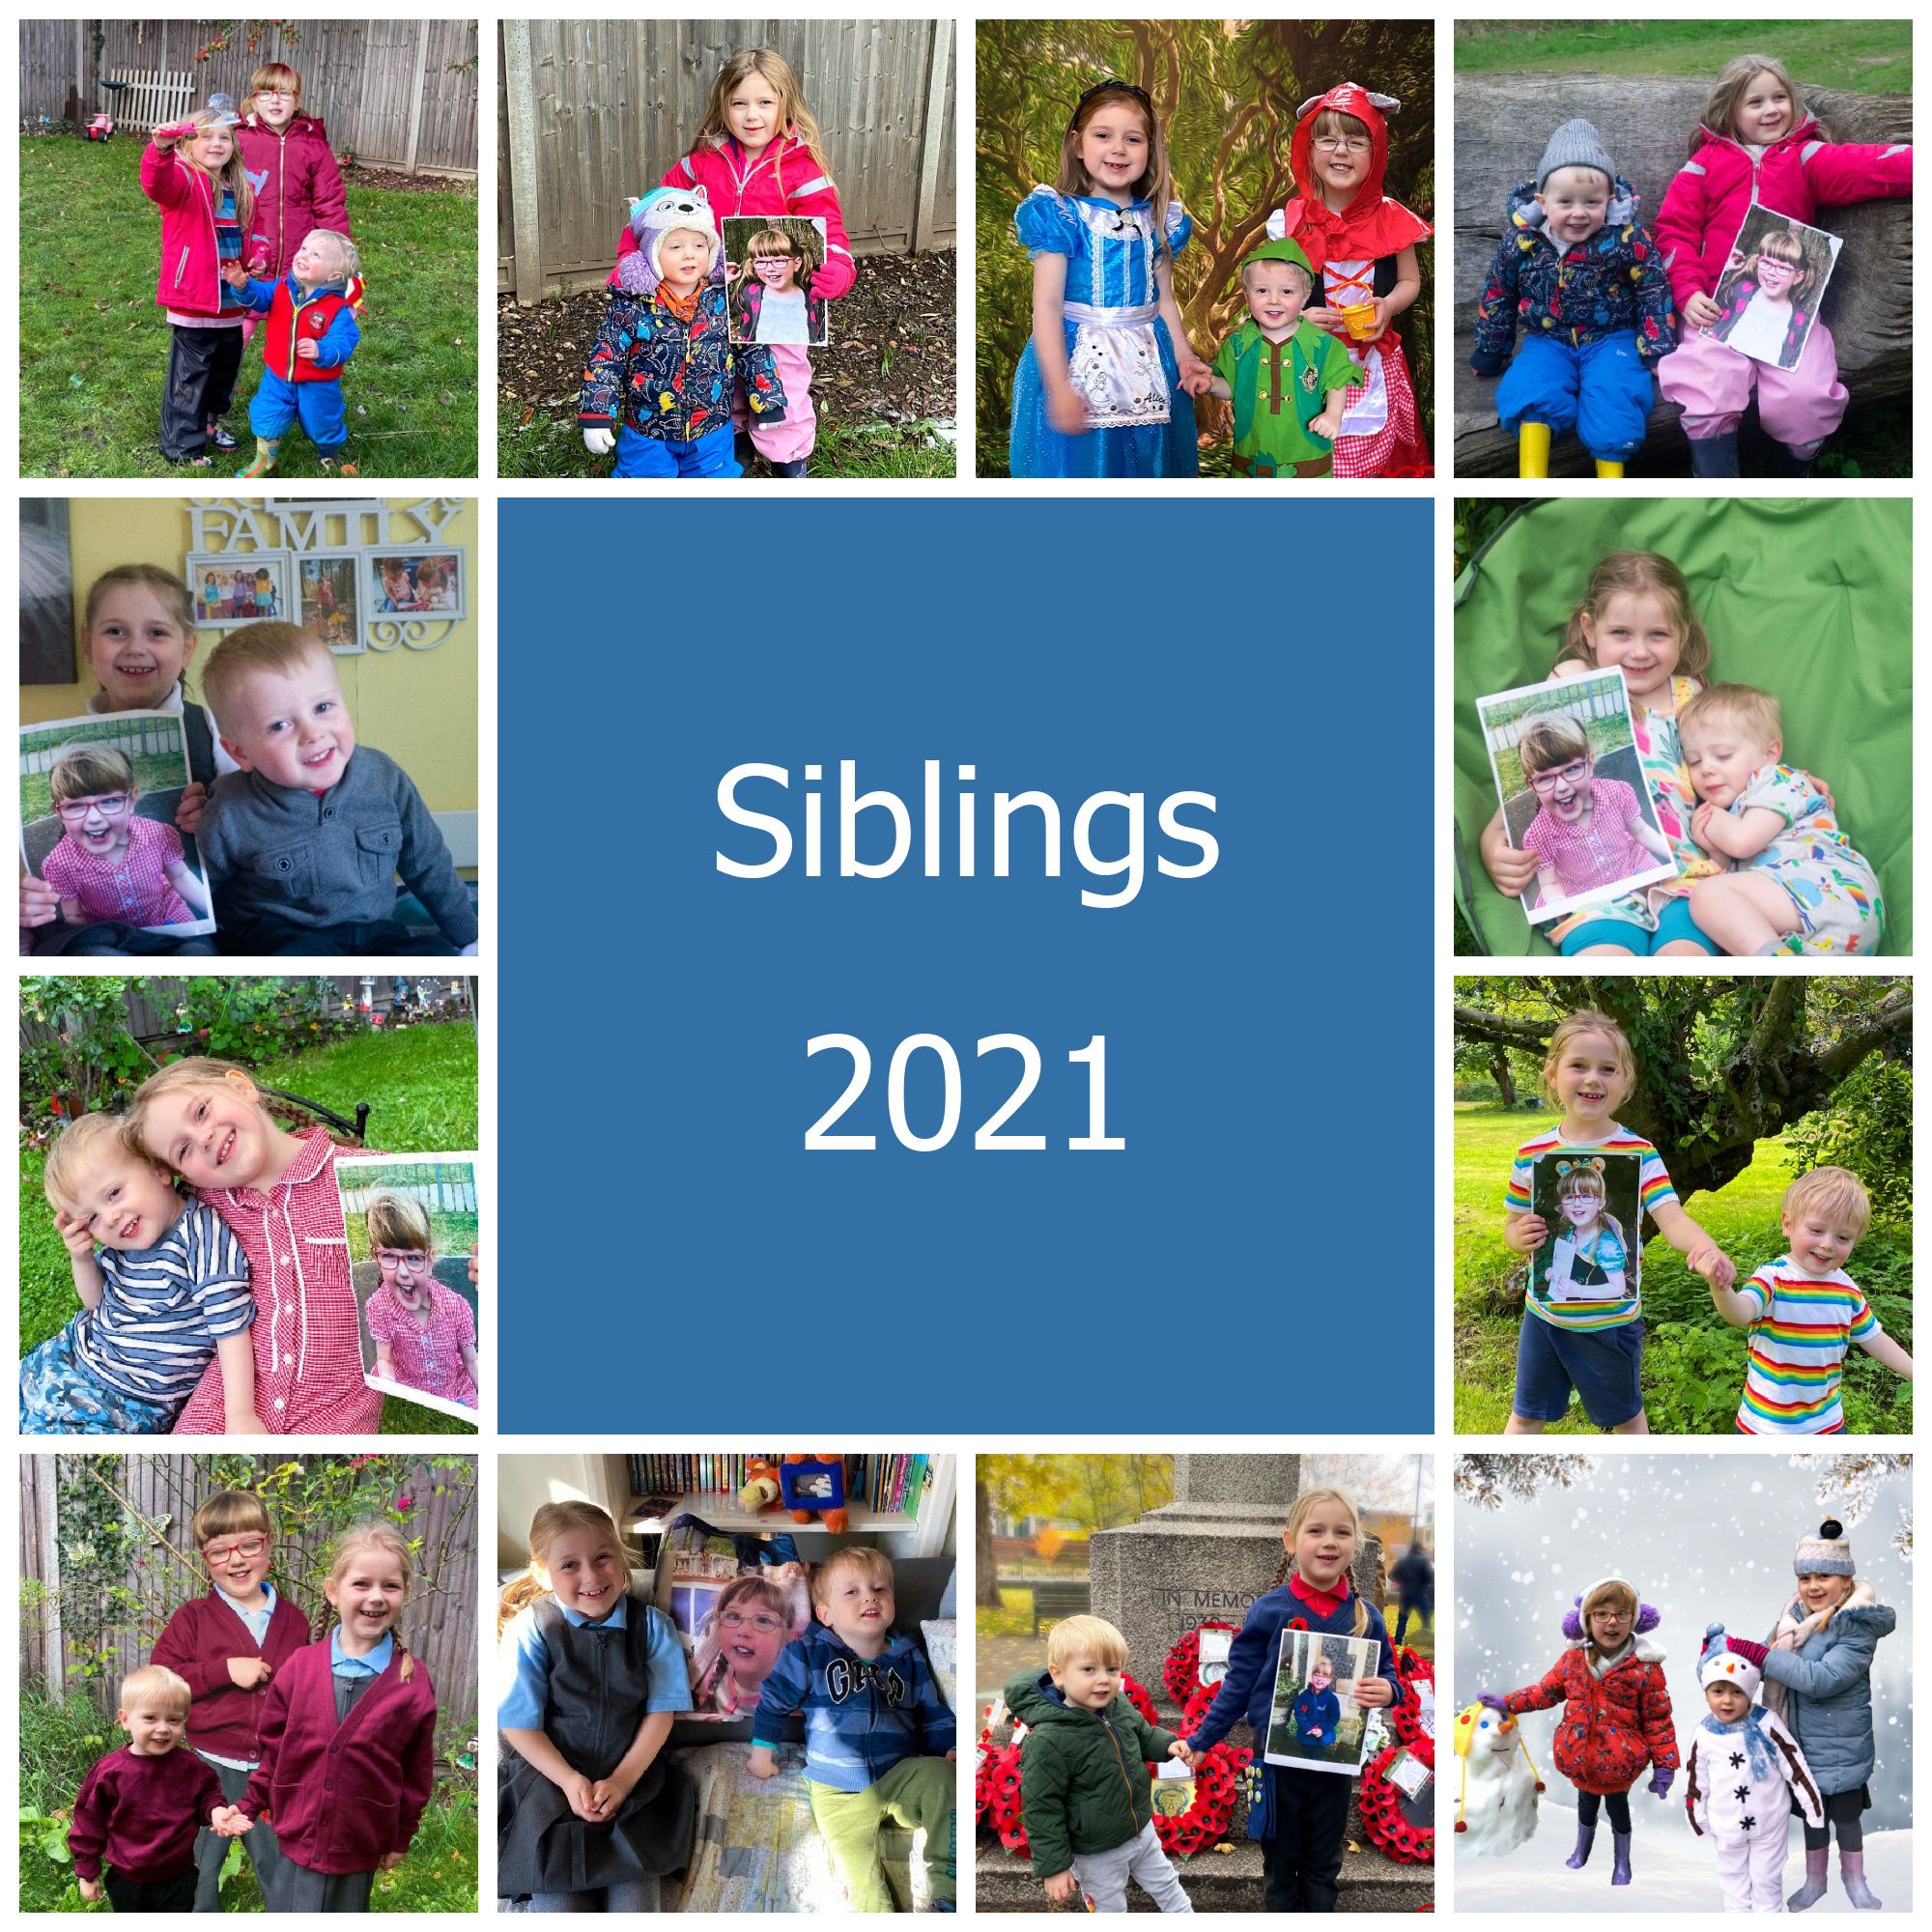 Our Siblings photos for 2021 - one photo for each month